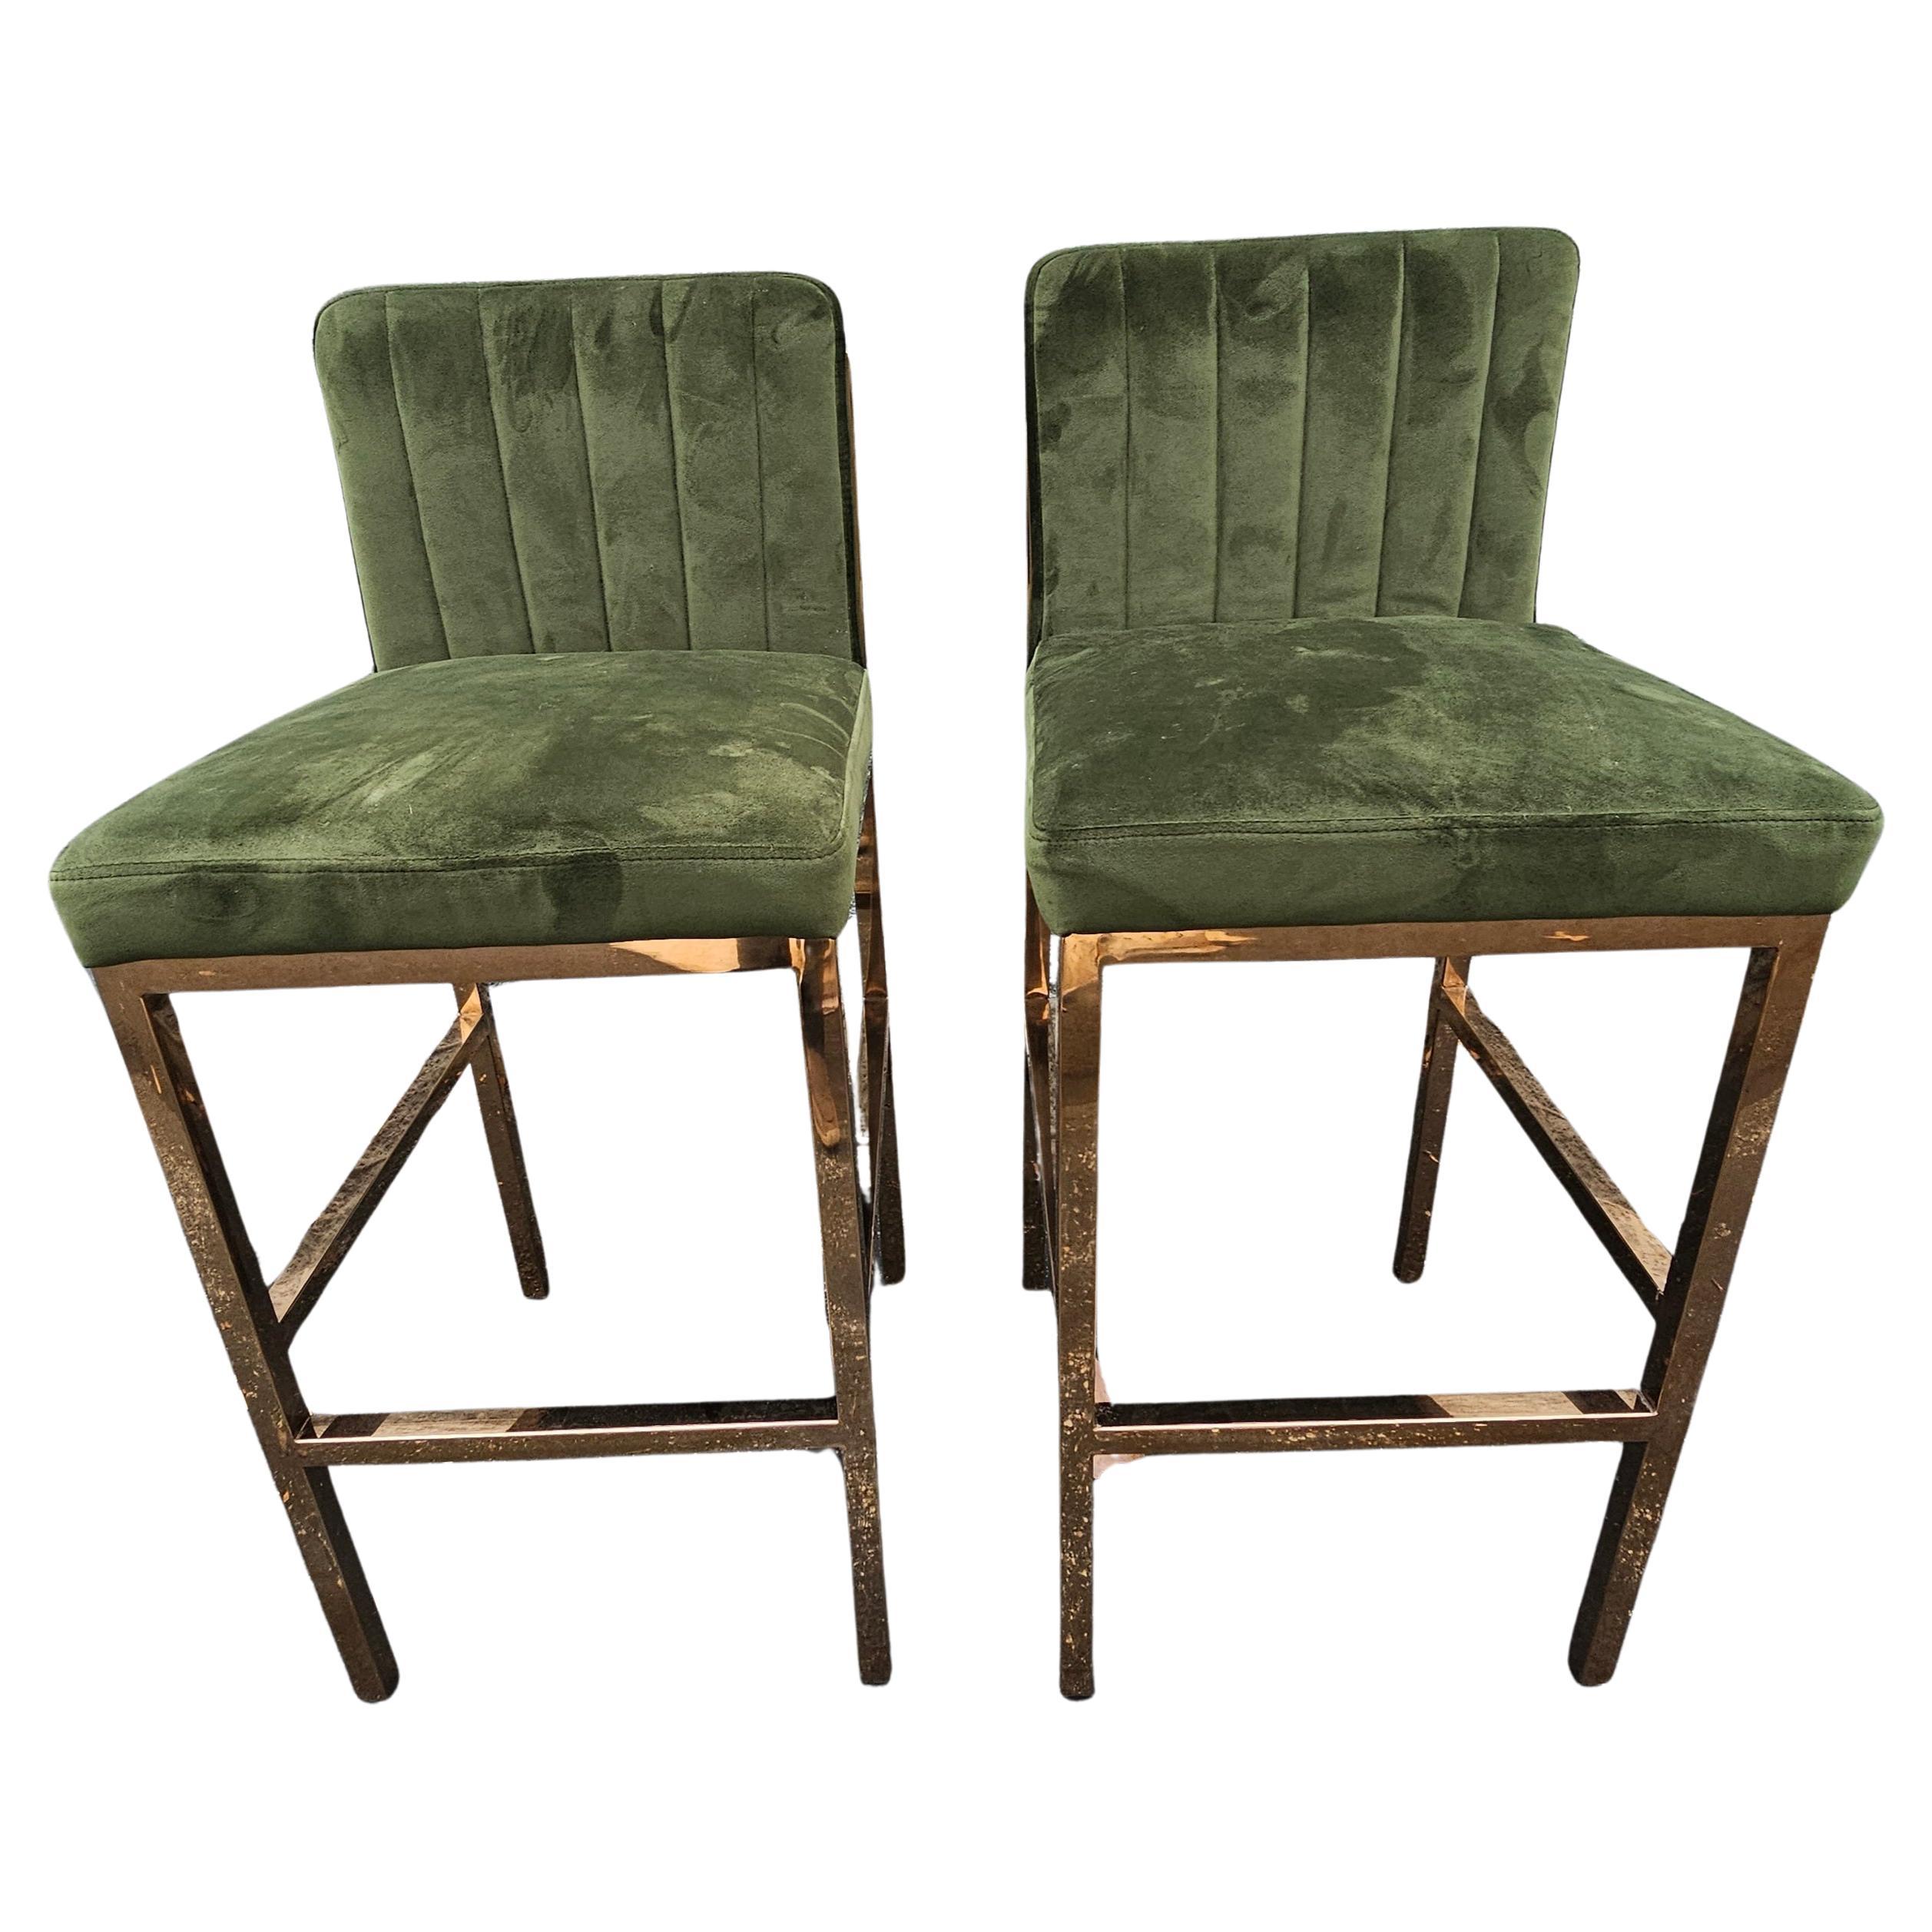 Contemporary Pair of Modern Polished Brass and Velvet Upholstered BarStools For Sale